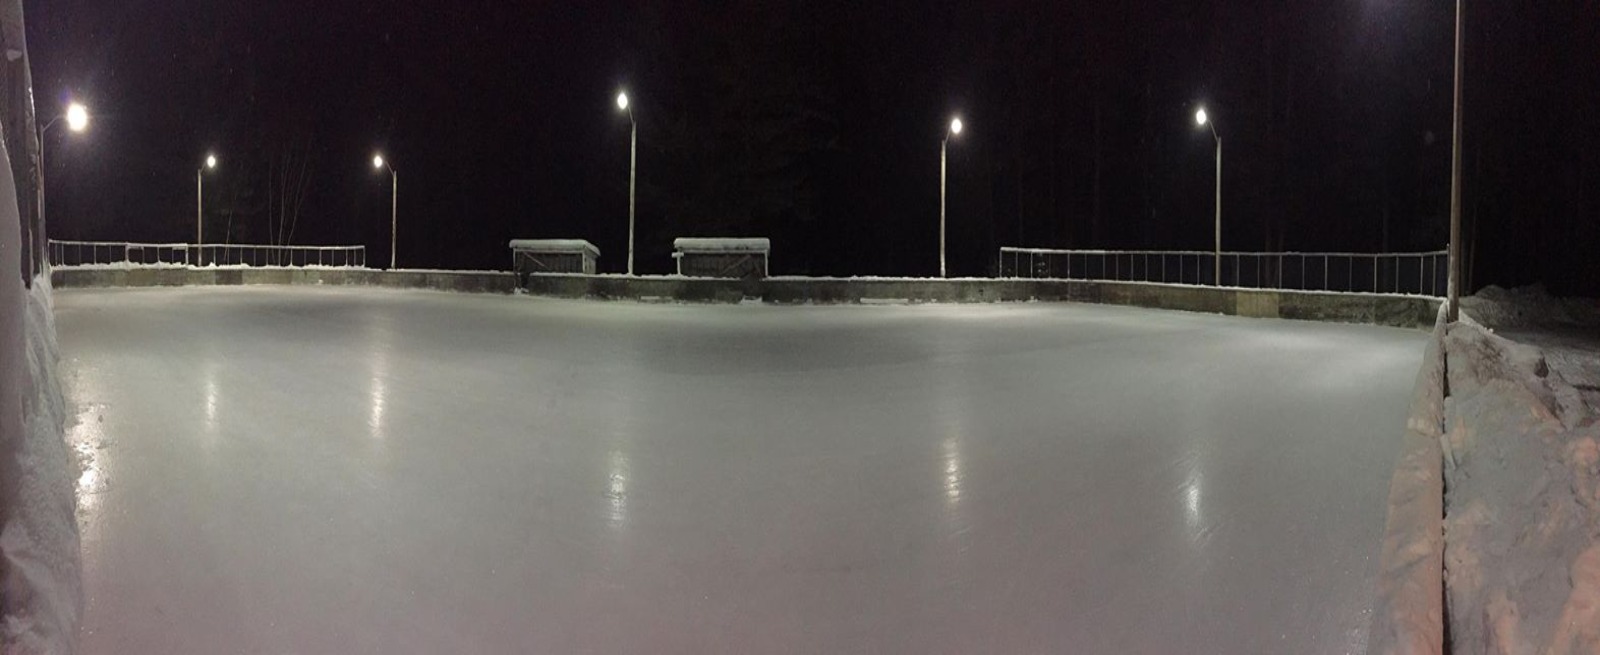 Griffith rink at night